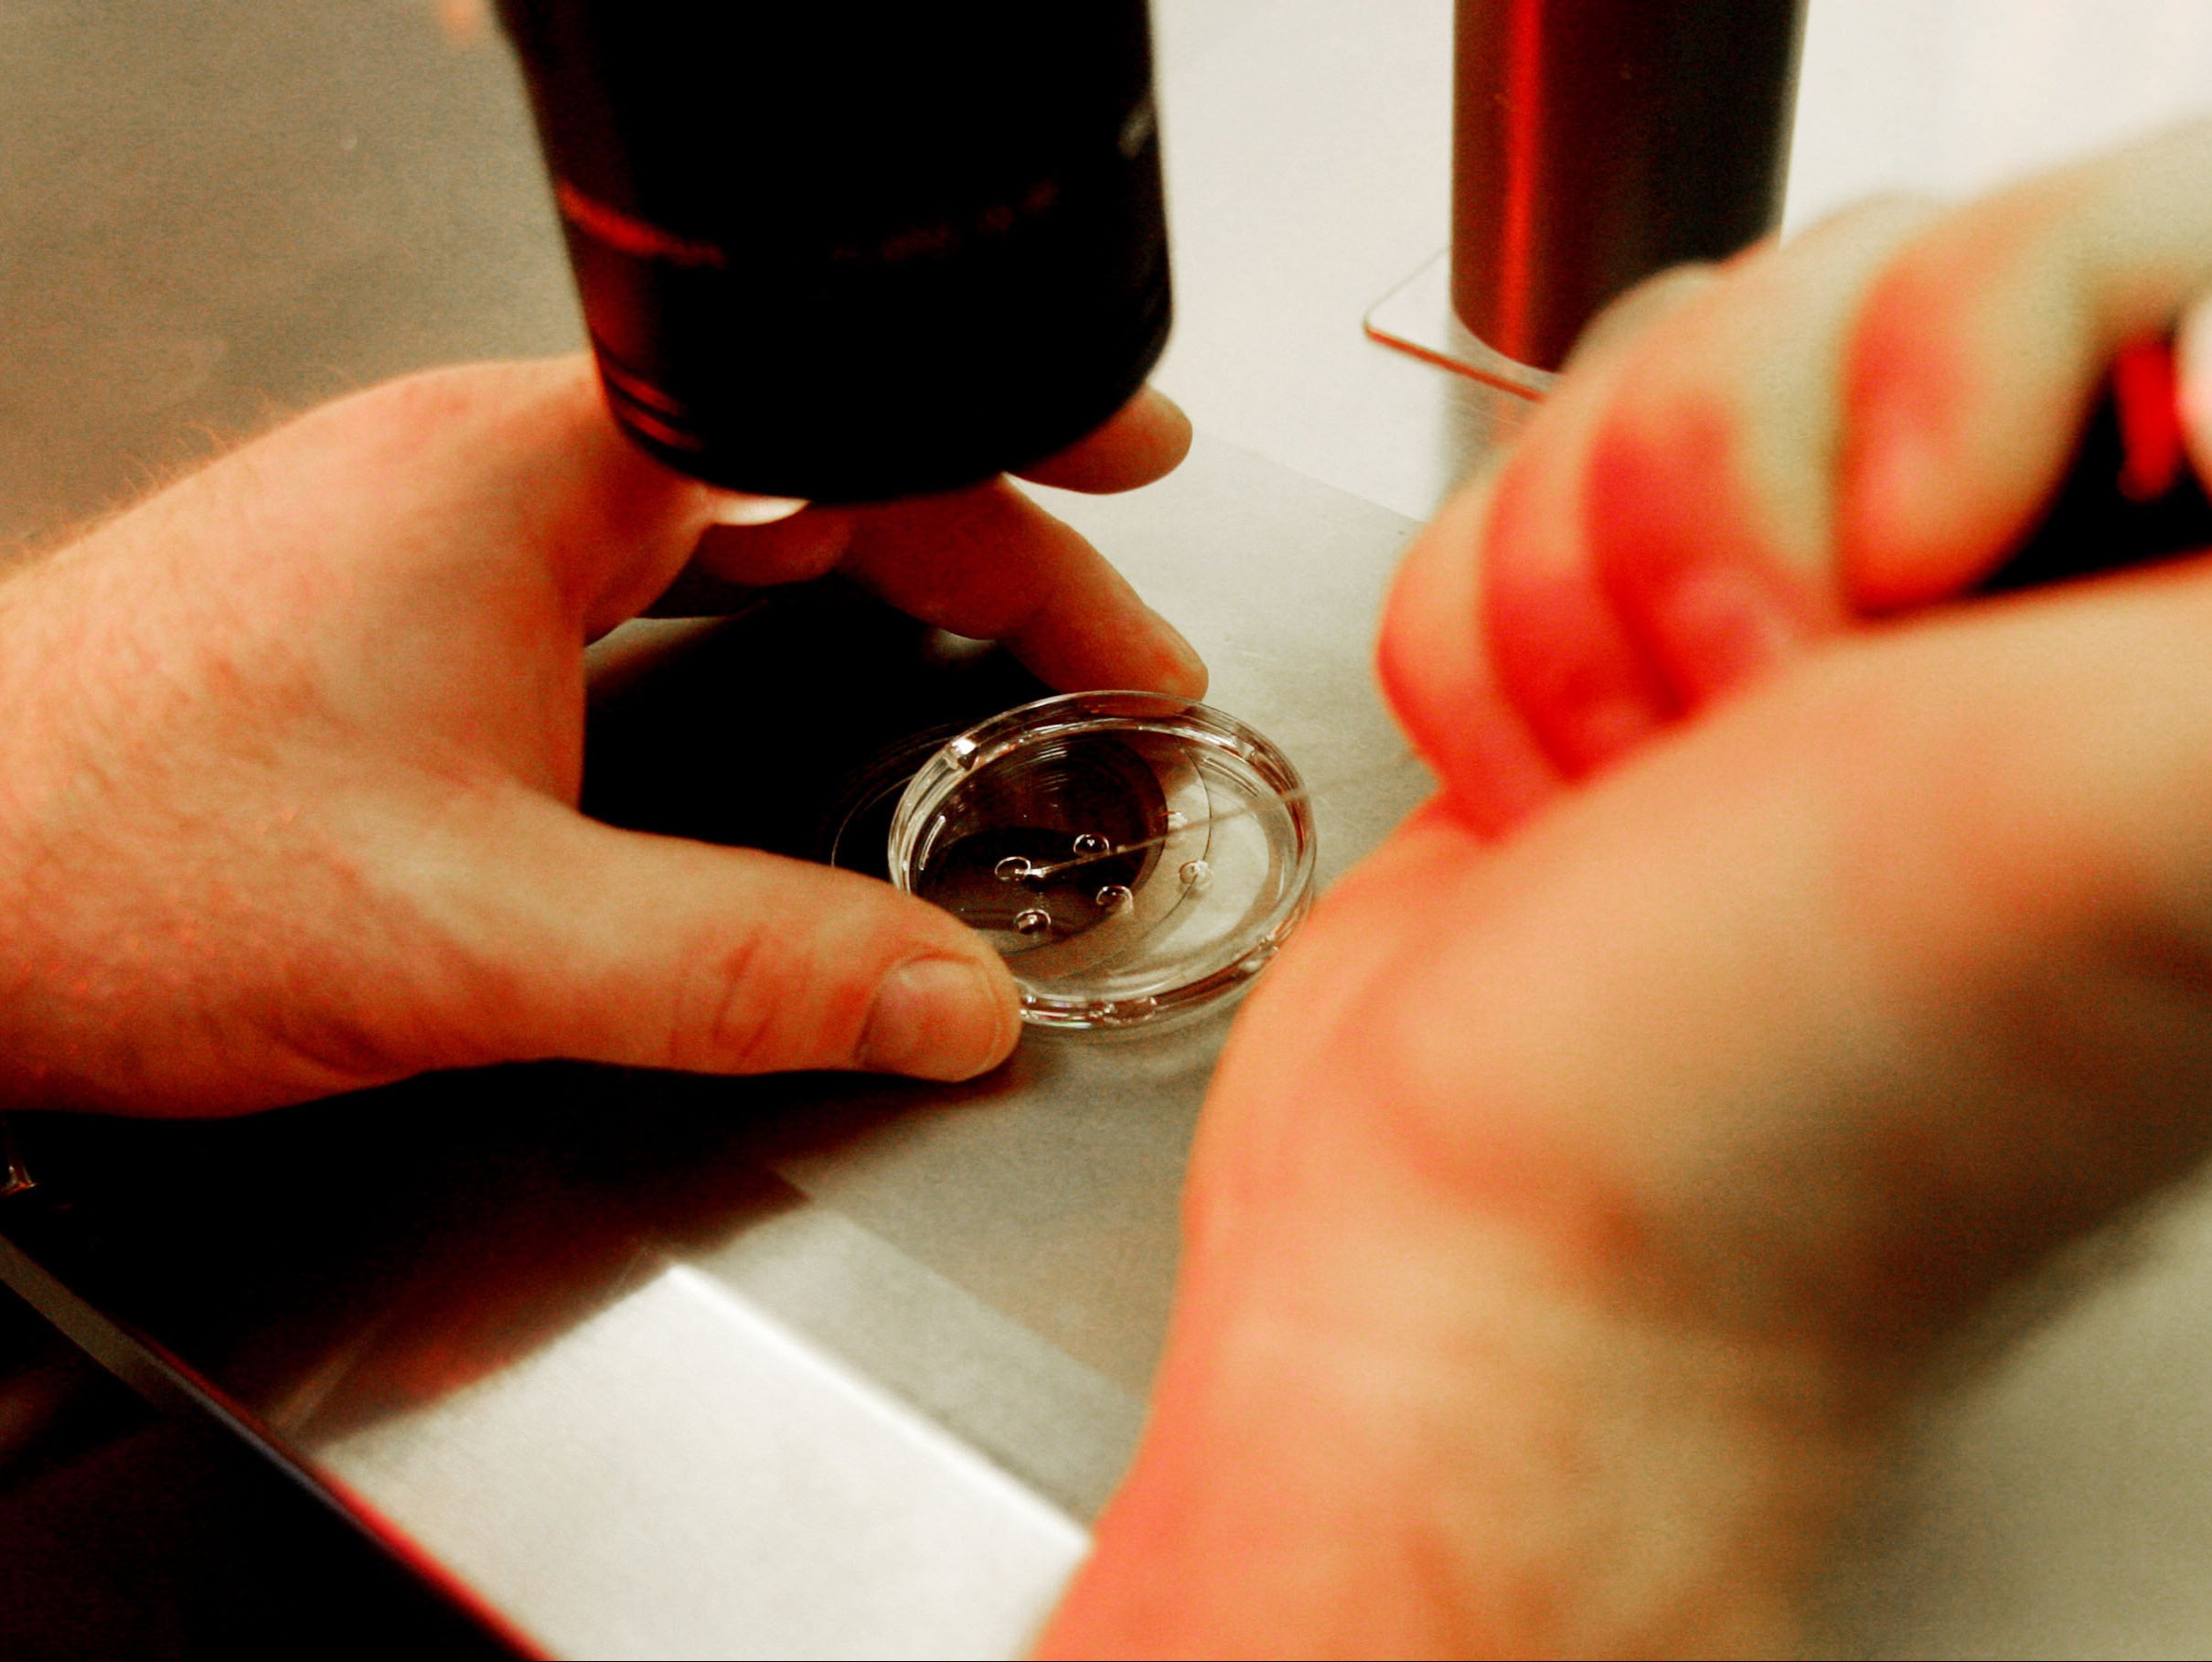 The limit on early human embryo research was set 40 years ago